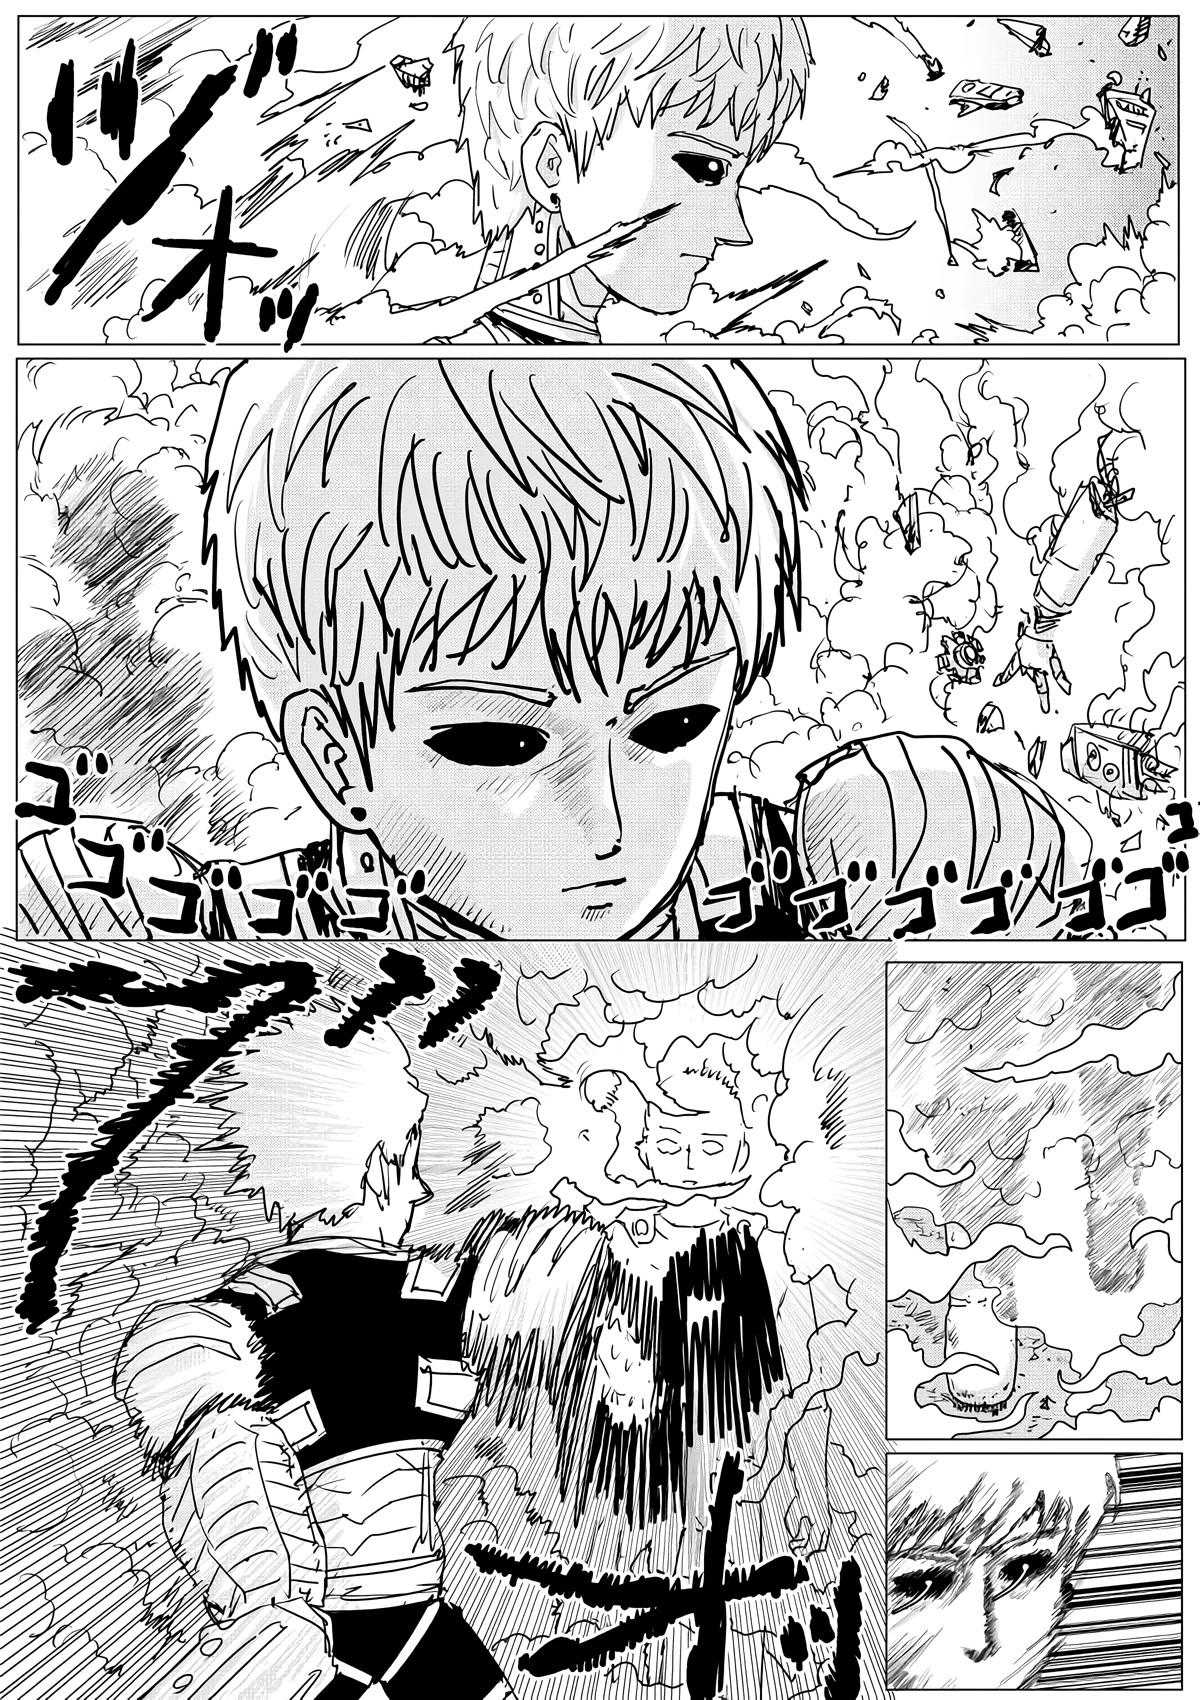 One-punch Man (ONE) - episode 149 - 11